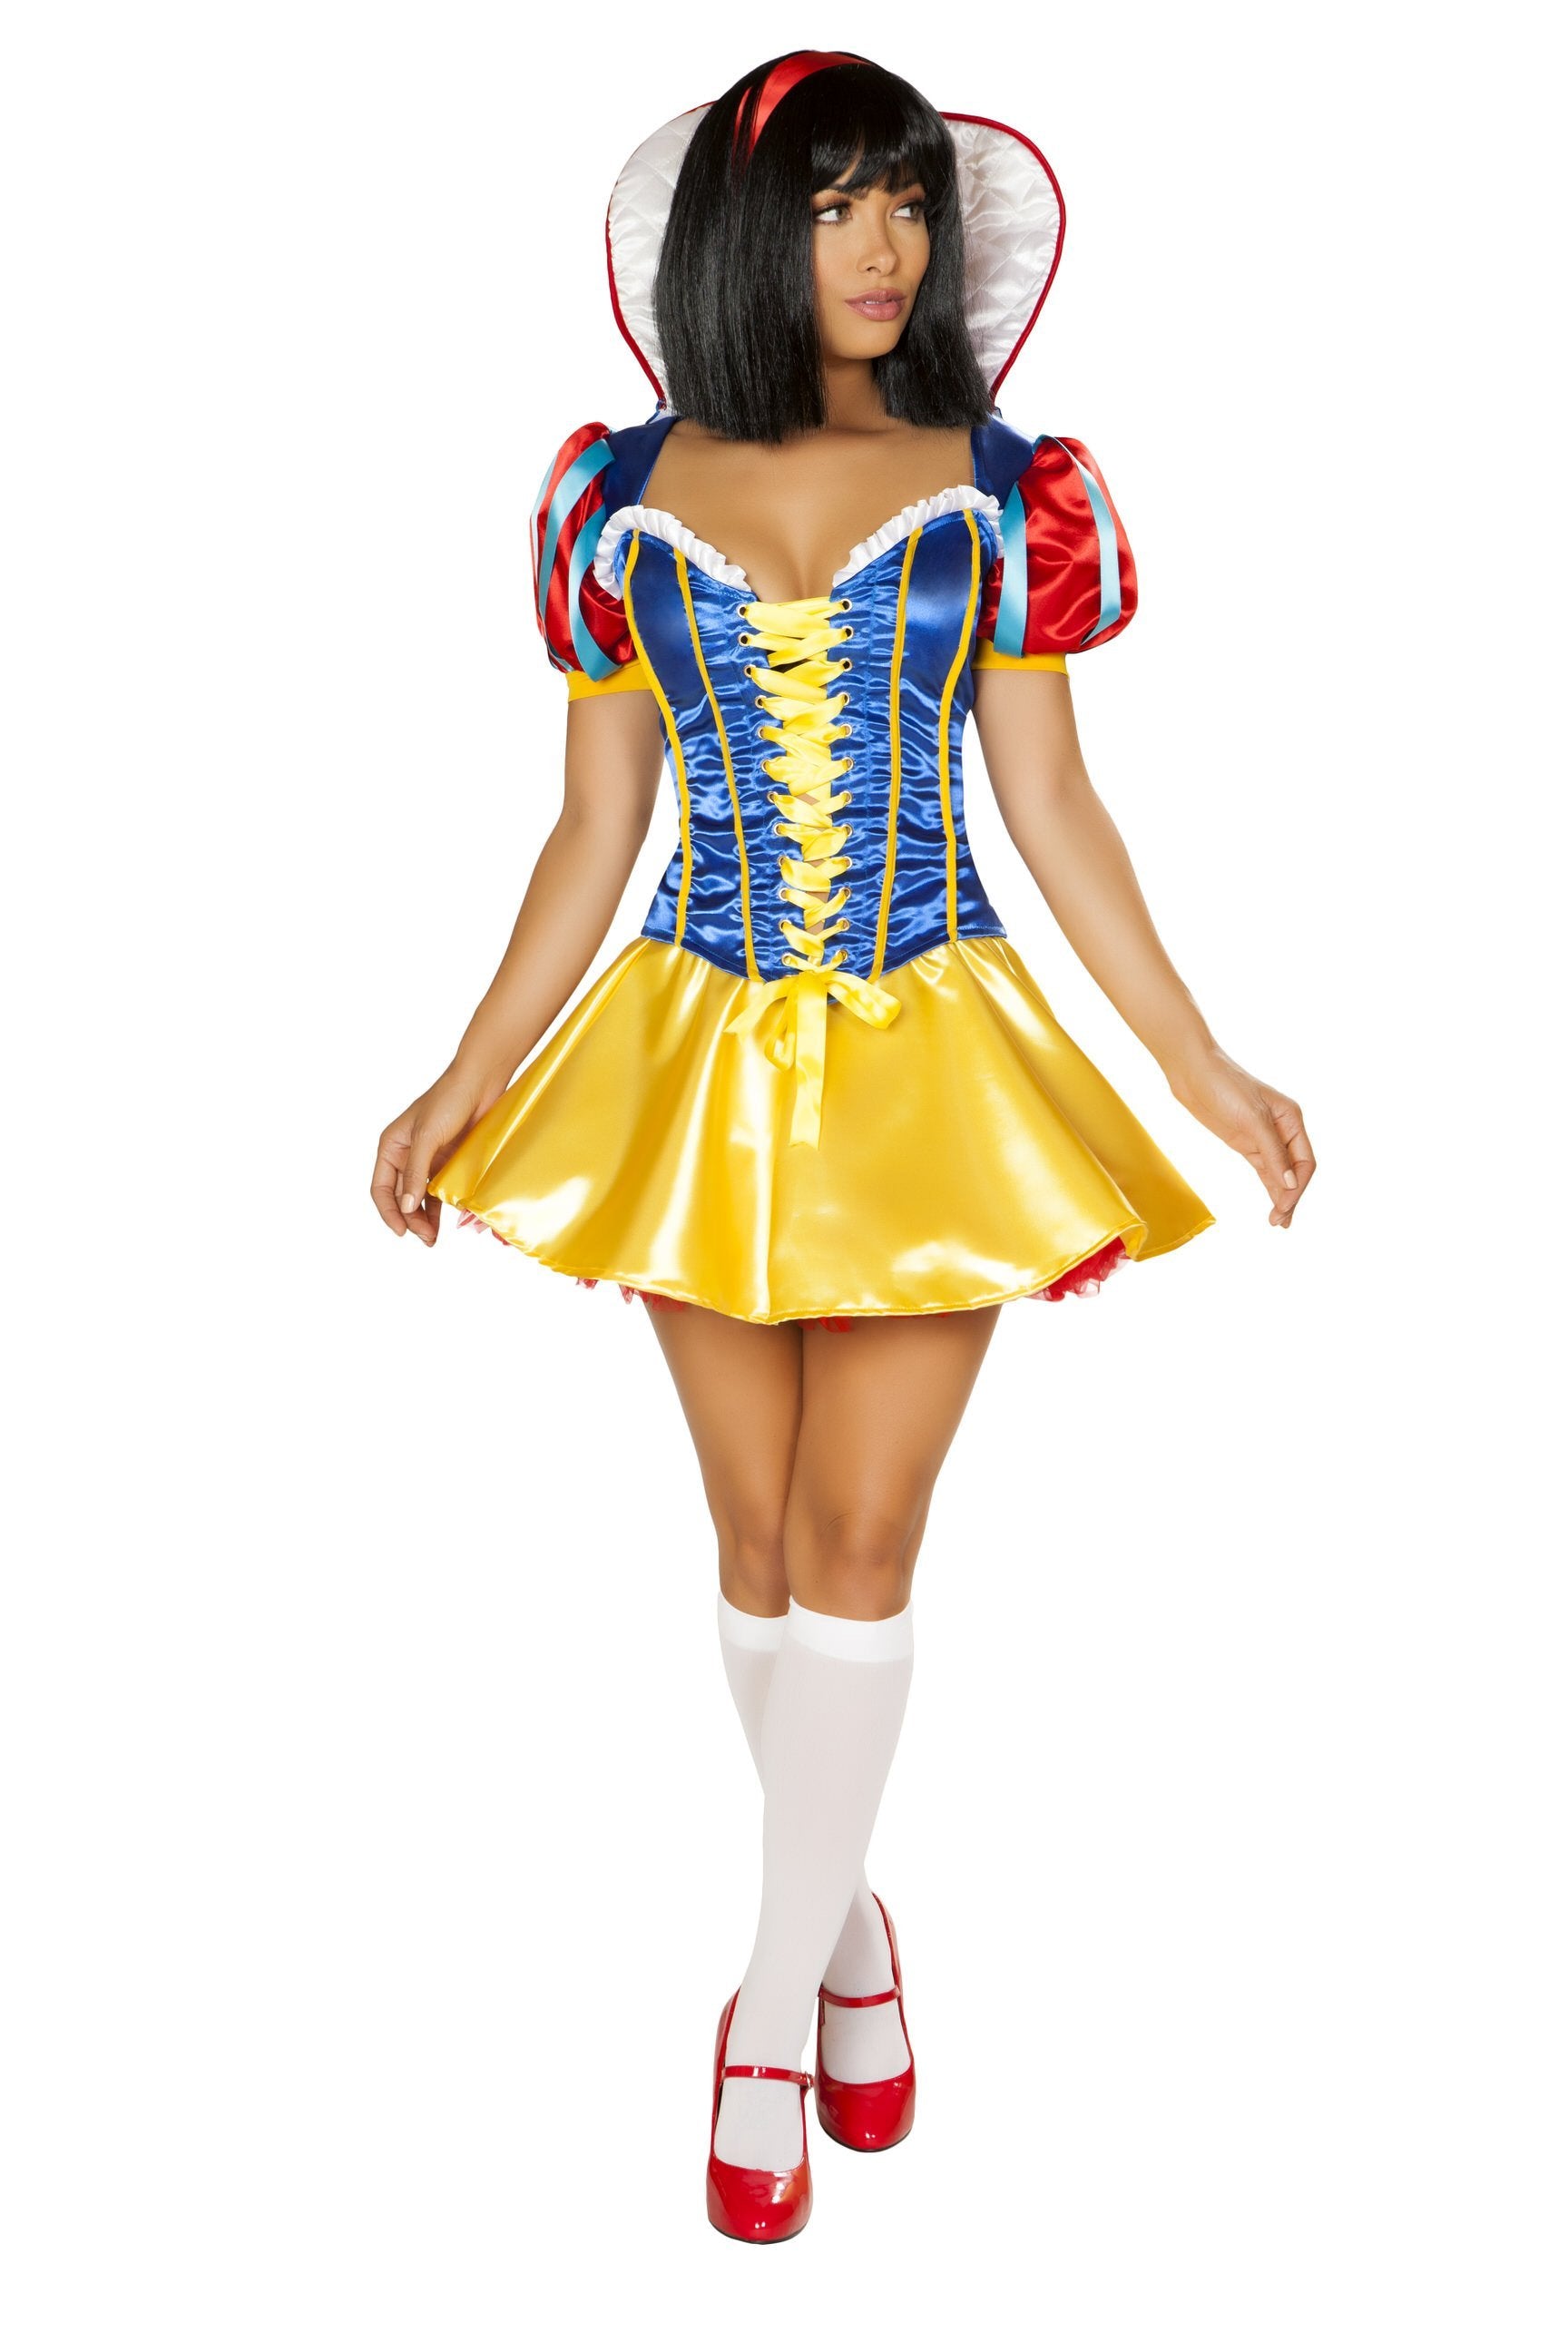 Roma Costume Costumes Small / Blue/Red/Yellow 4855 - 2pc Pure as Snow